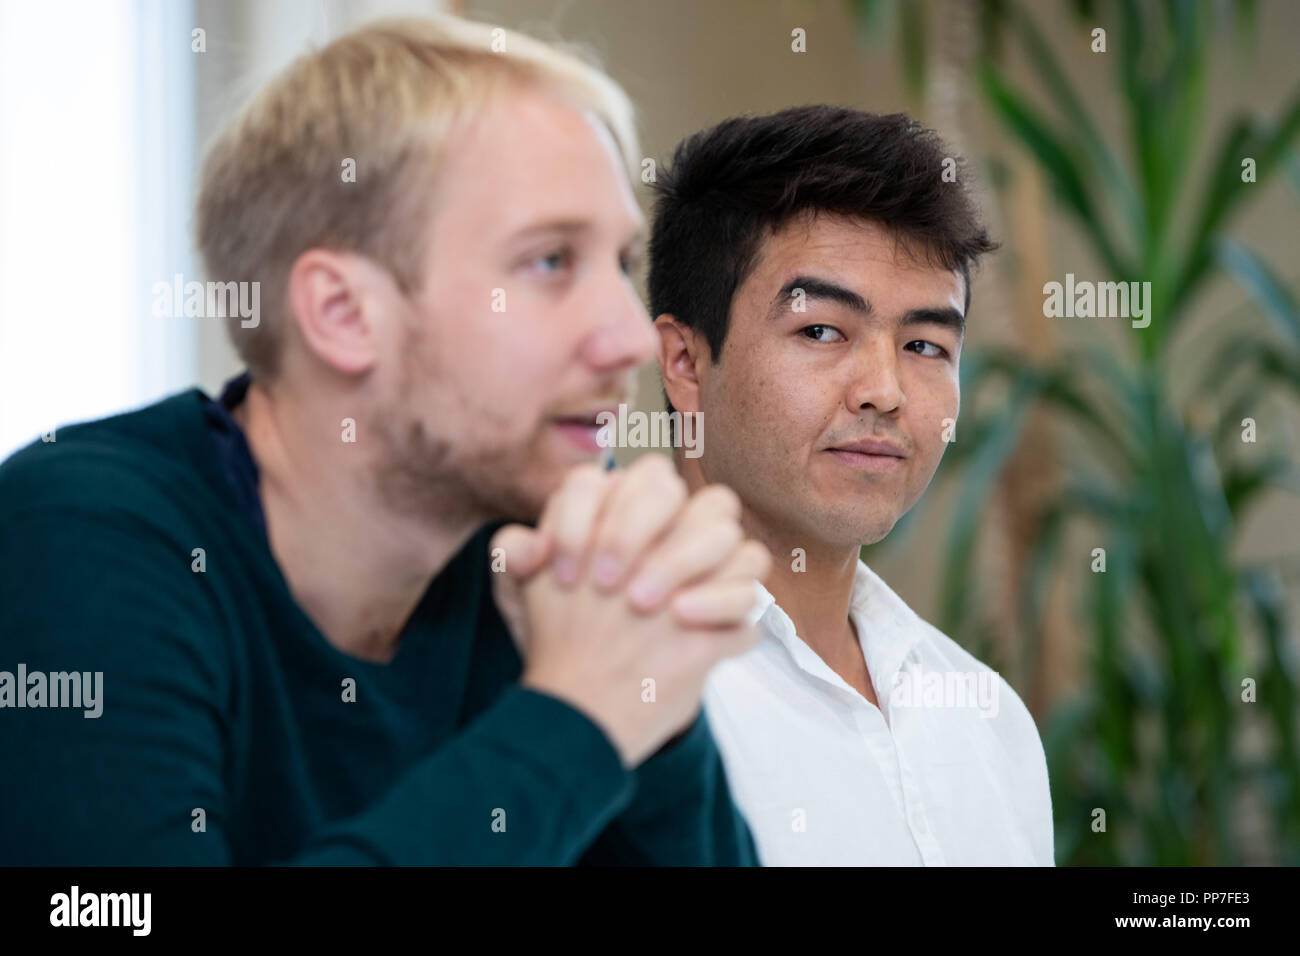 24 September 2018, Bavaria, Nuernberg: Michael Brenner (l), lawyer, speaking alongside his client Asif N., a refugee from Afghanistan, during a press conference on the occasion of a pending trial after a tumultuous deportation attempt. On May 31, 2017, the then 20-year-old was to be taken into deportation custody from a Nuremberg vocational school. The deployment had attracted attention and criticism nationwide. Asif N., who is on trial this Wednesday, 26.09.2018, after a tumultuous deportation attempt in Nuremberg, still hopes for a right of residence in Germany. Photo: Daniel Karmann/dpa Stock Photo